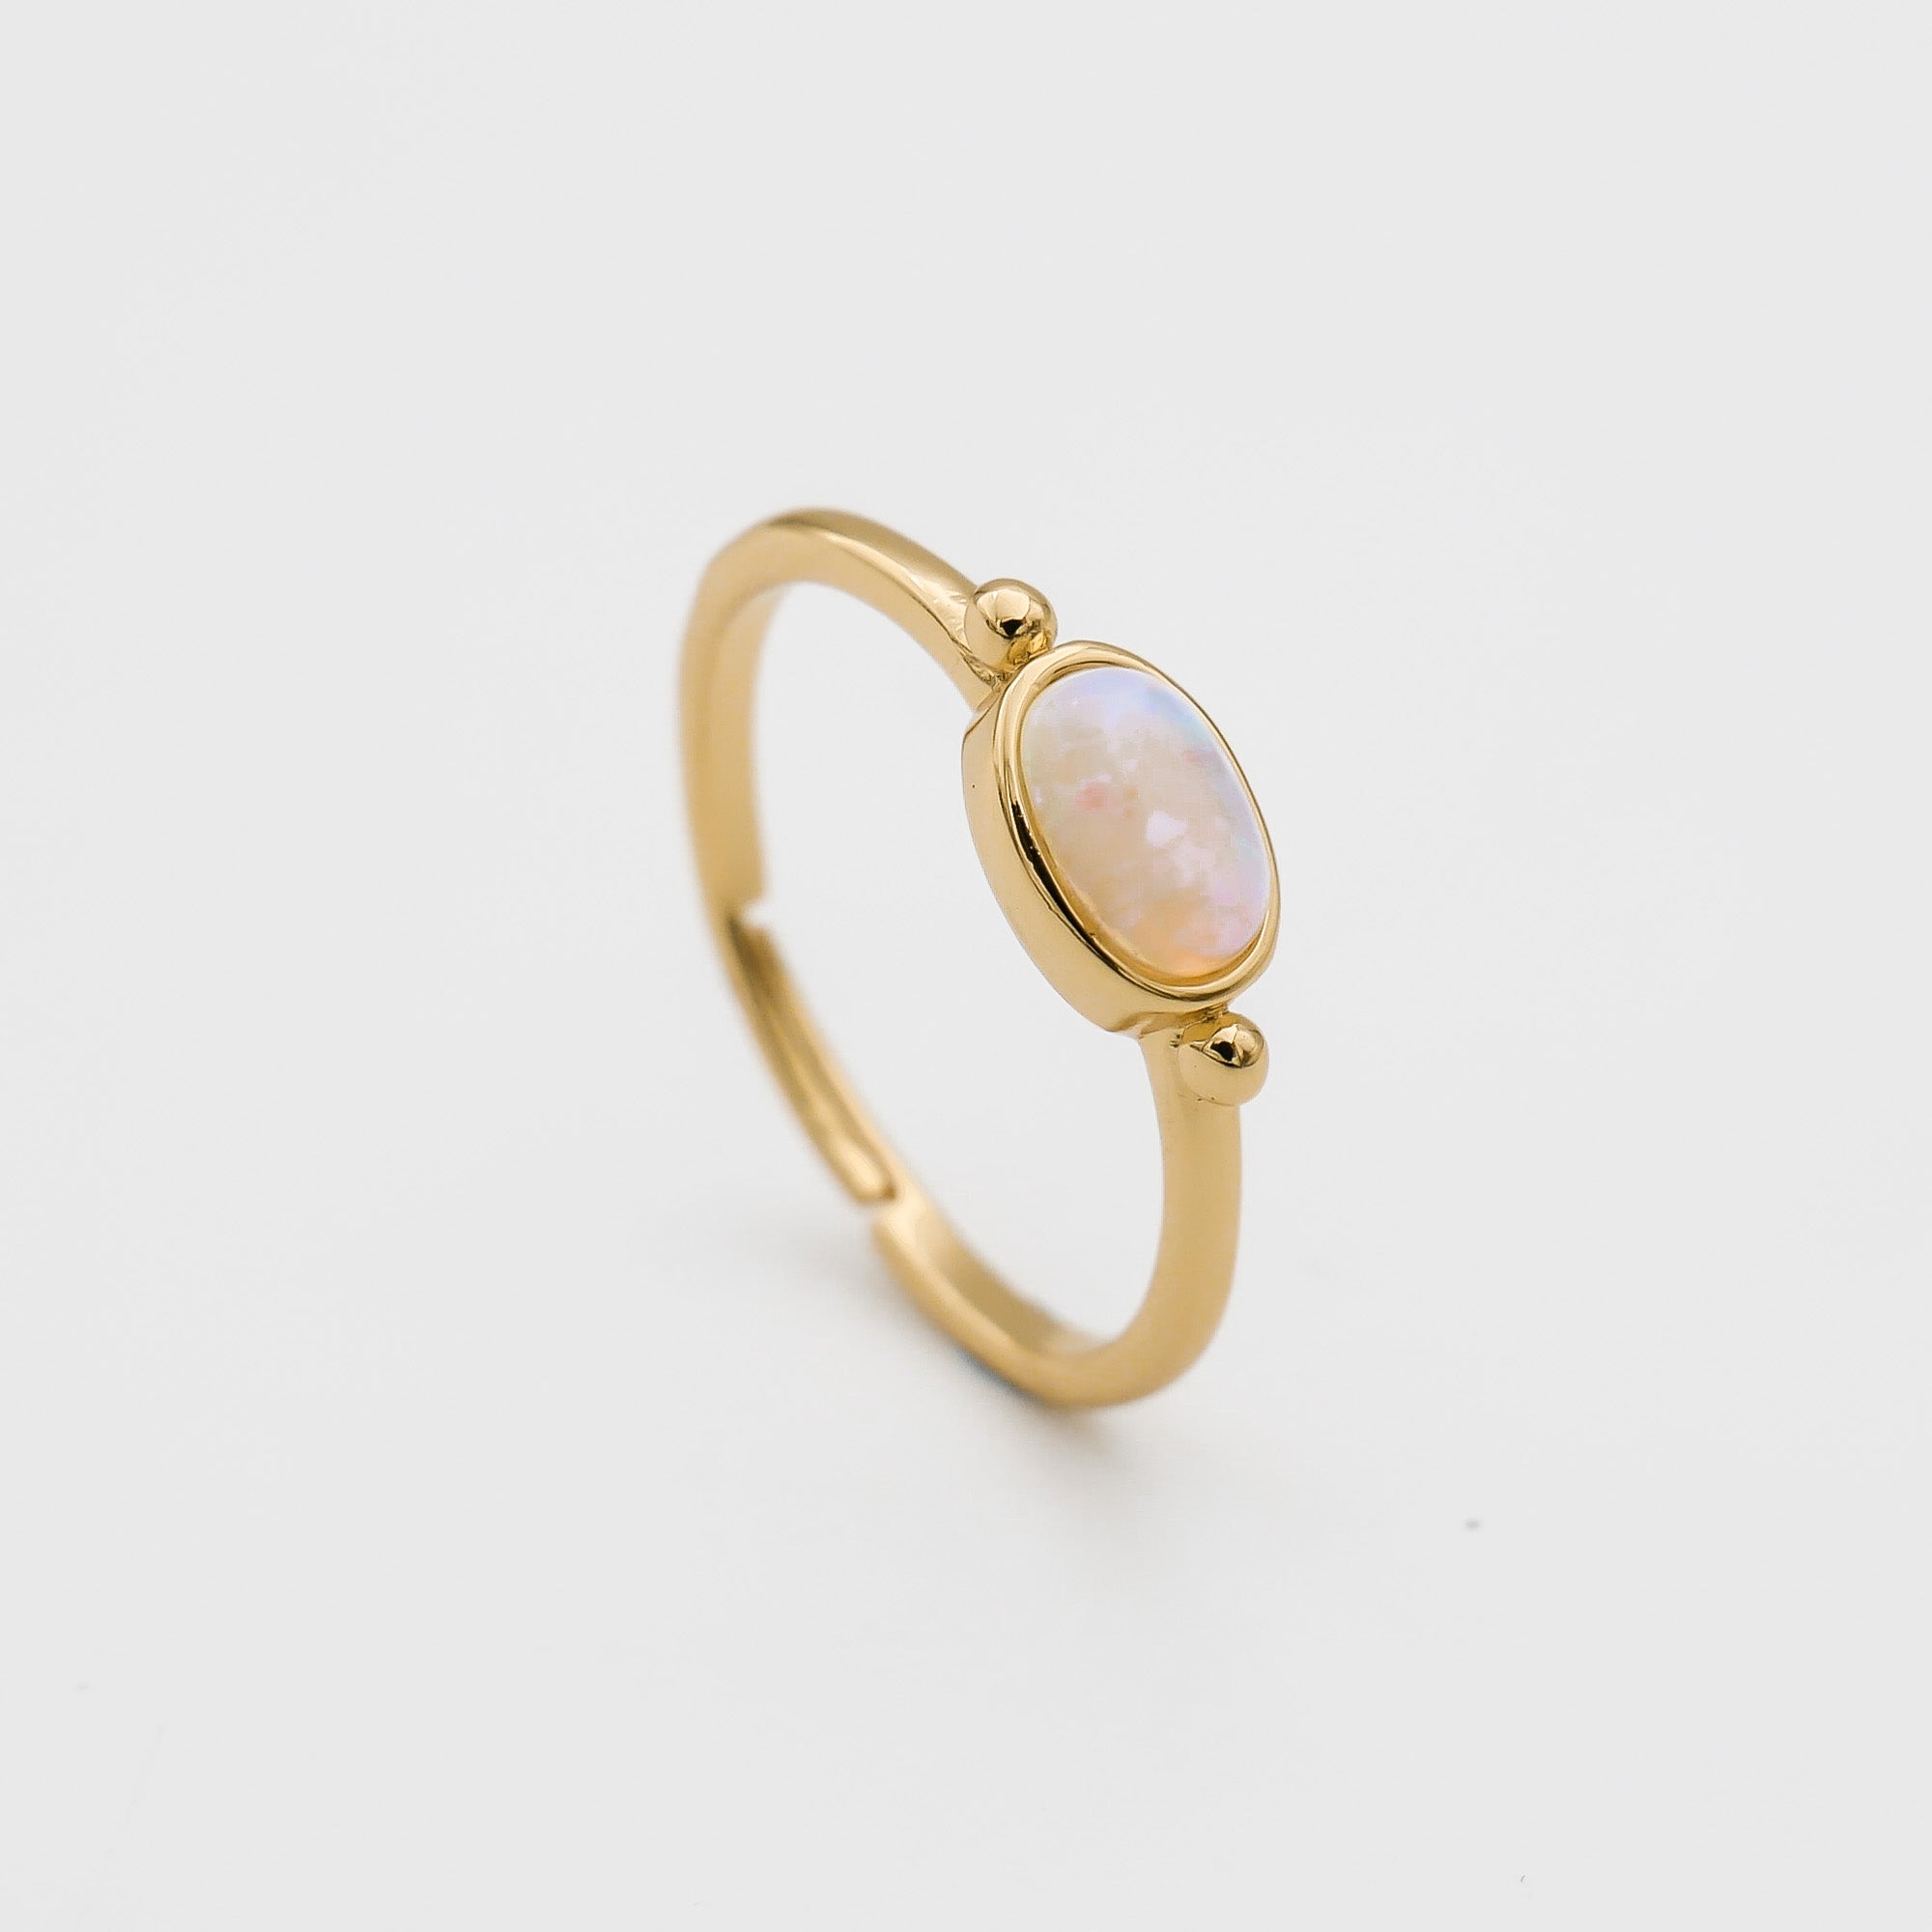 Birthstone ring gold for October with opal